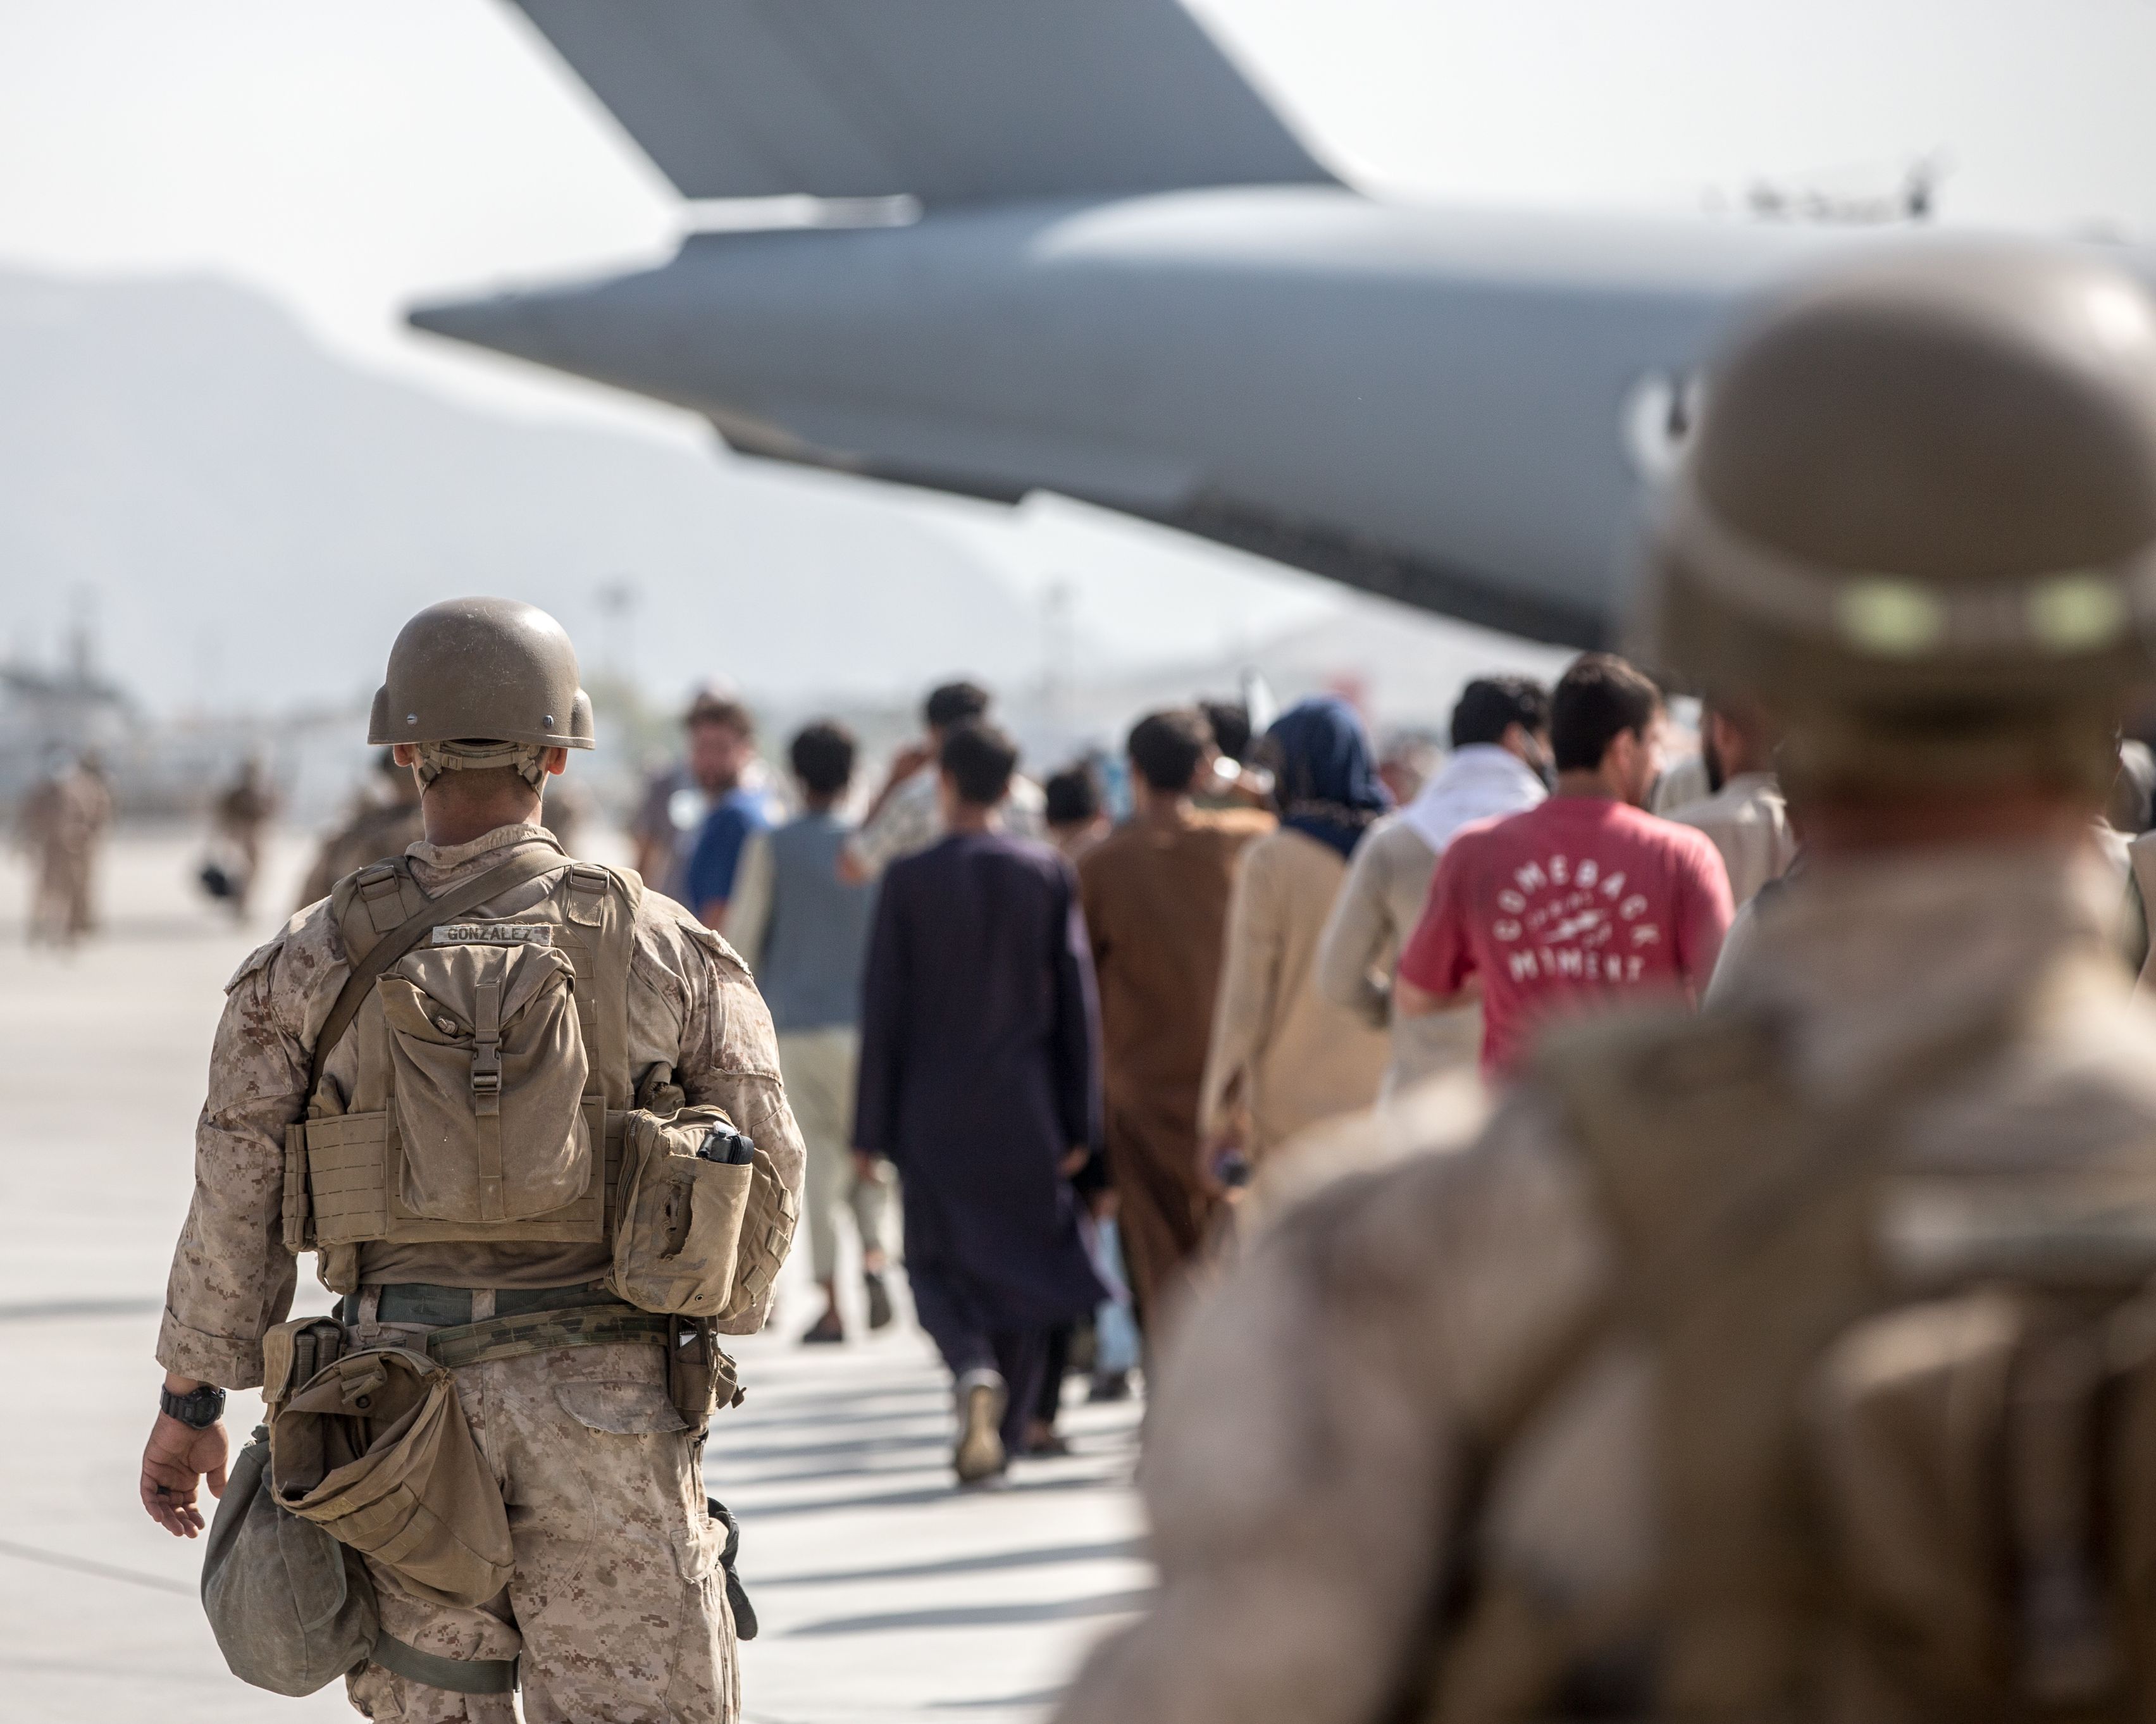 210821-M-GQ845-1042 HAMID KARZAI INTERNATIONAL AIRPORT, Afghanistan (August 21, 2021) Marines with Special Purpose Marine Air-Ground Task Force-Crisis Response-Central Command (SPMAGTF-CR-CC) guide evacuees on to a United Arab Emirates